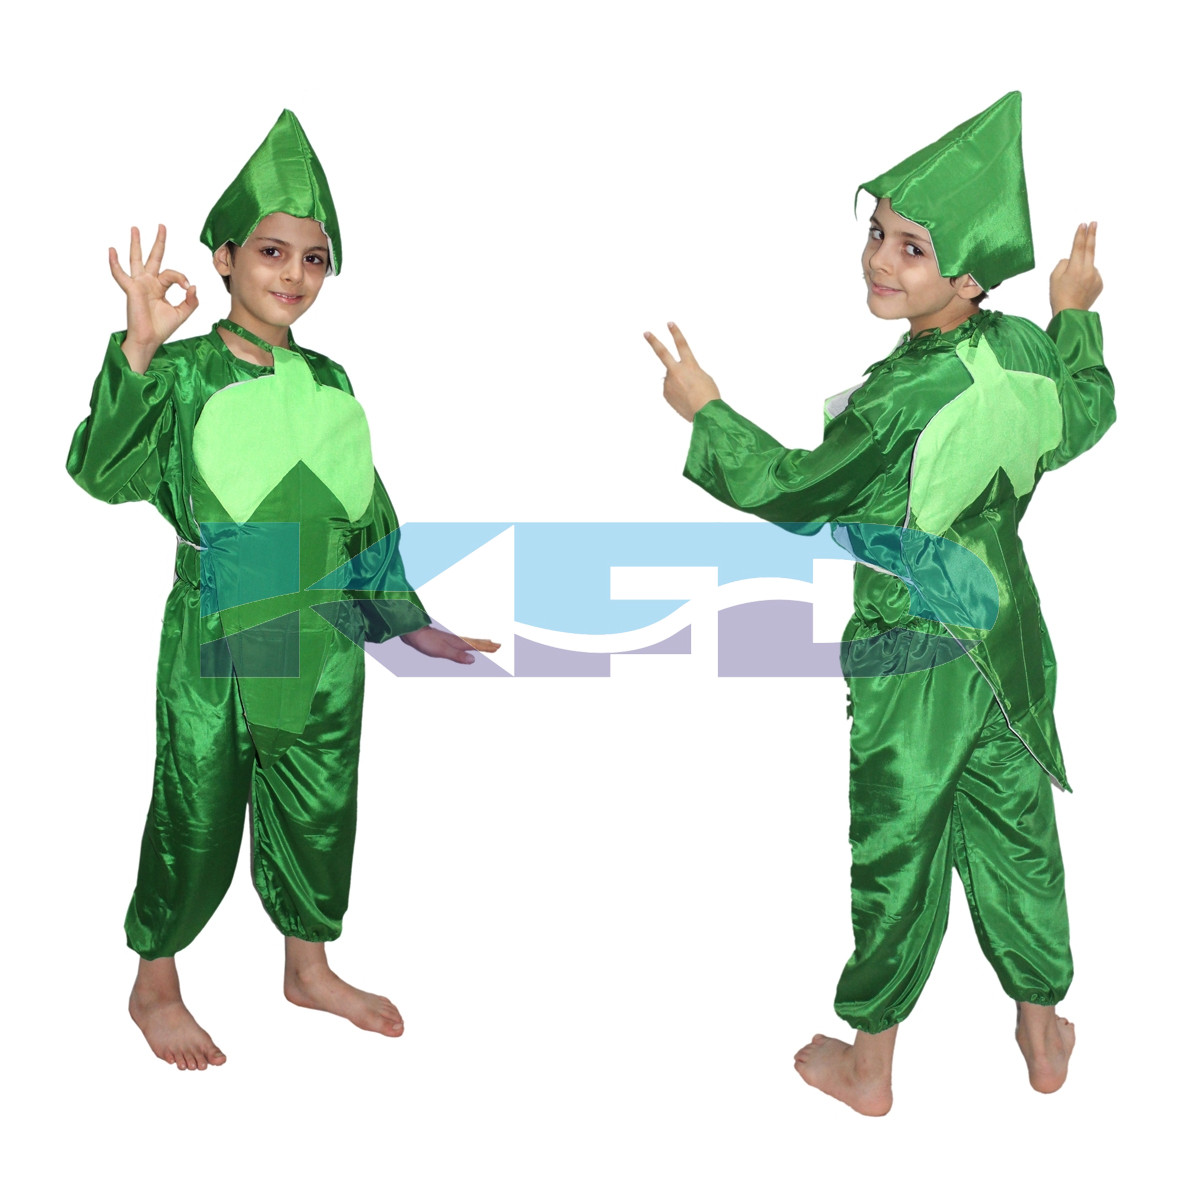 Lady finger fancy dress for kids,Vegetables Costume for School Annual function/Theme Party/Competition/Stage Shows Dress